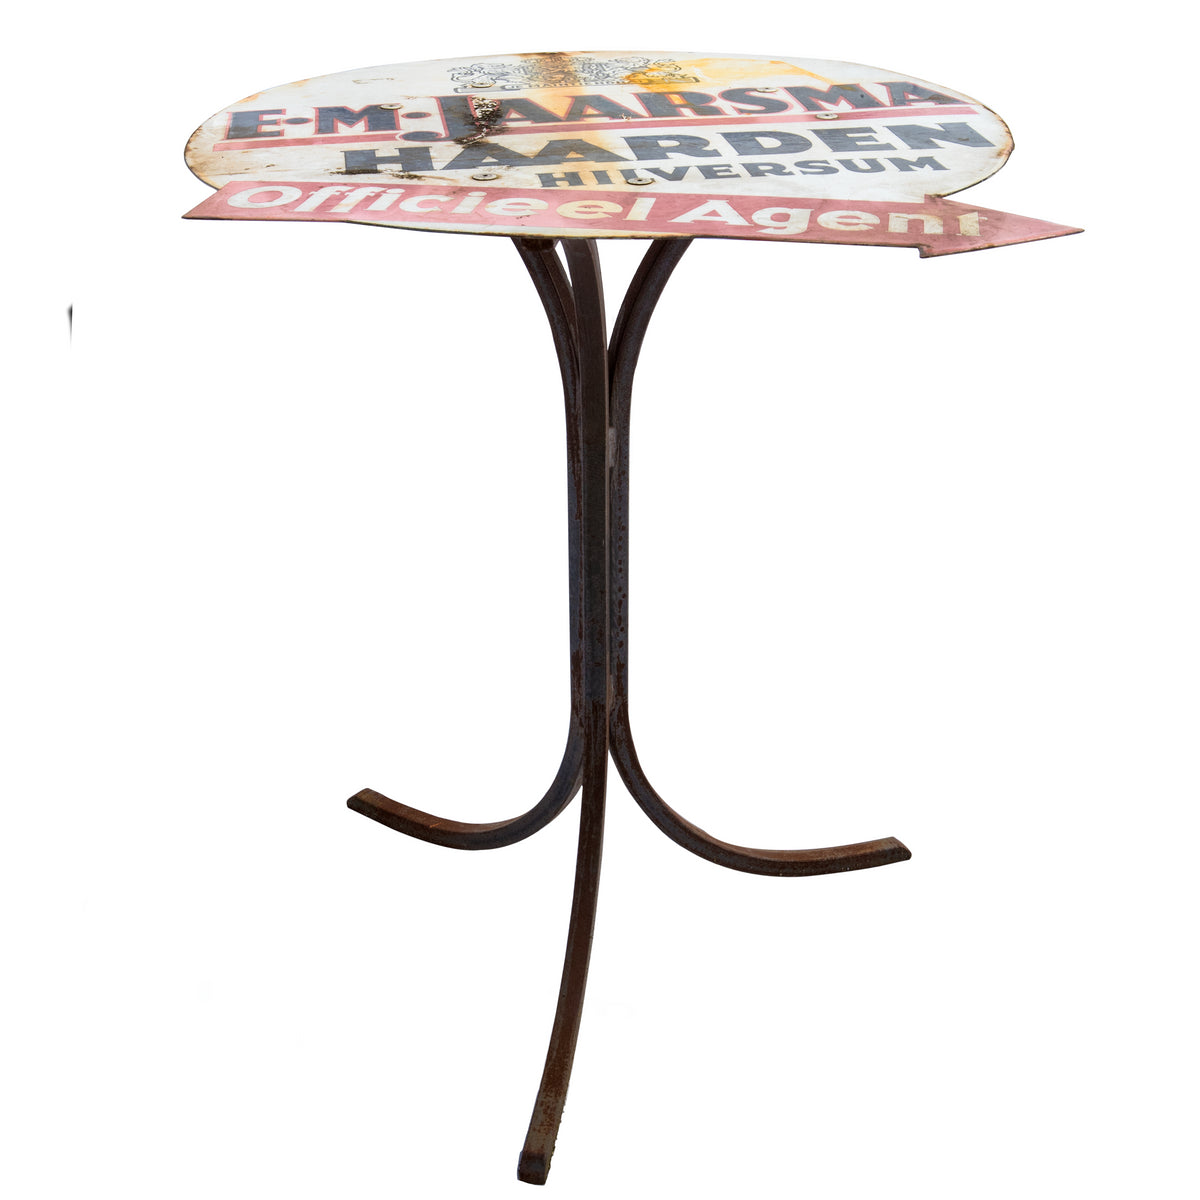 Upcycled Metal Garden Table | The Architectural Forum